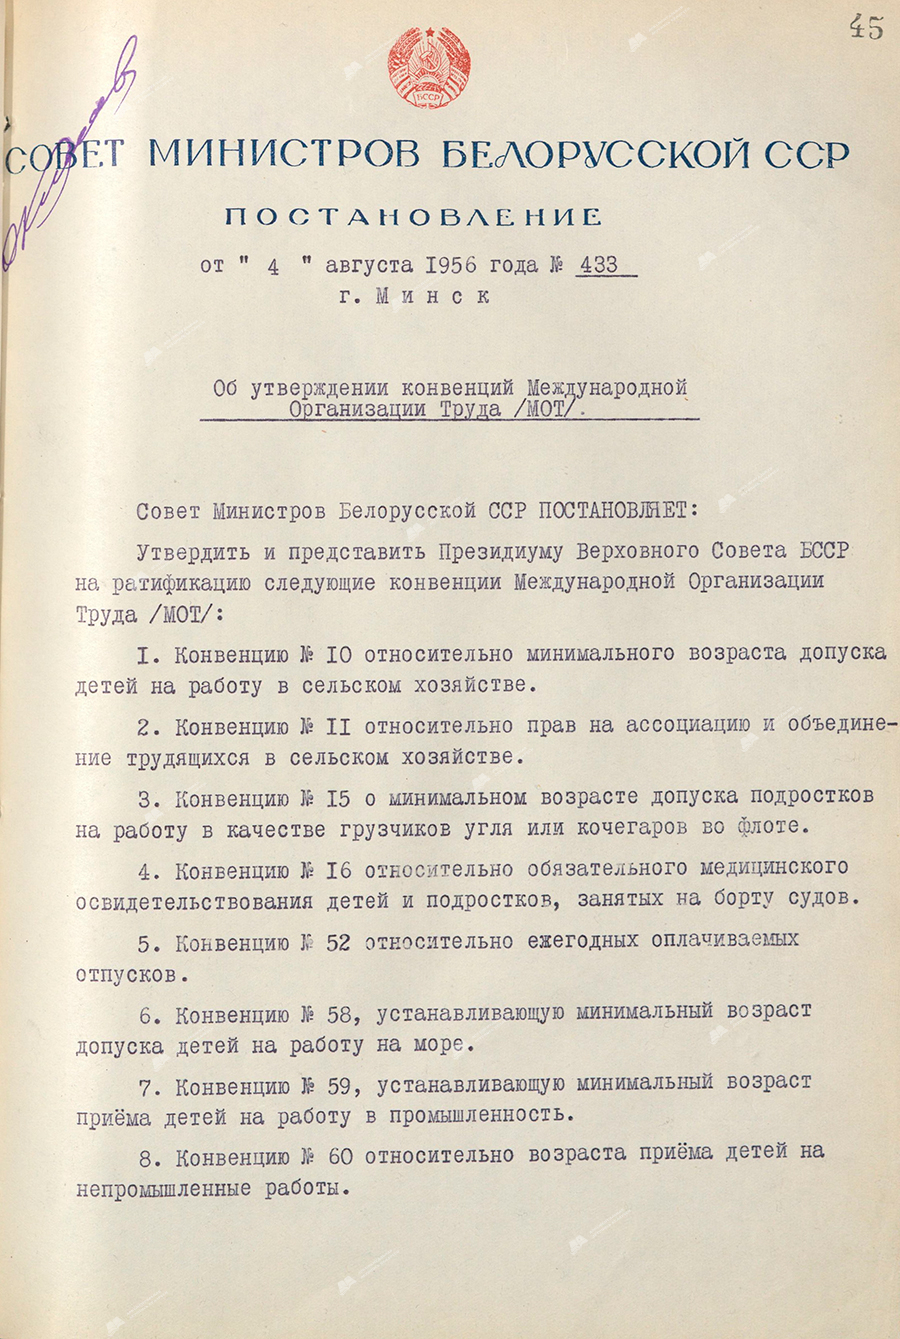 Resolution No. 433 of the Council of Ministers of the Byelorussian SSR «On approval of the conventions of the International Labor Organization (ILO)»-стр. 0